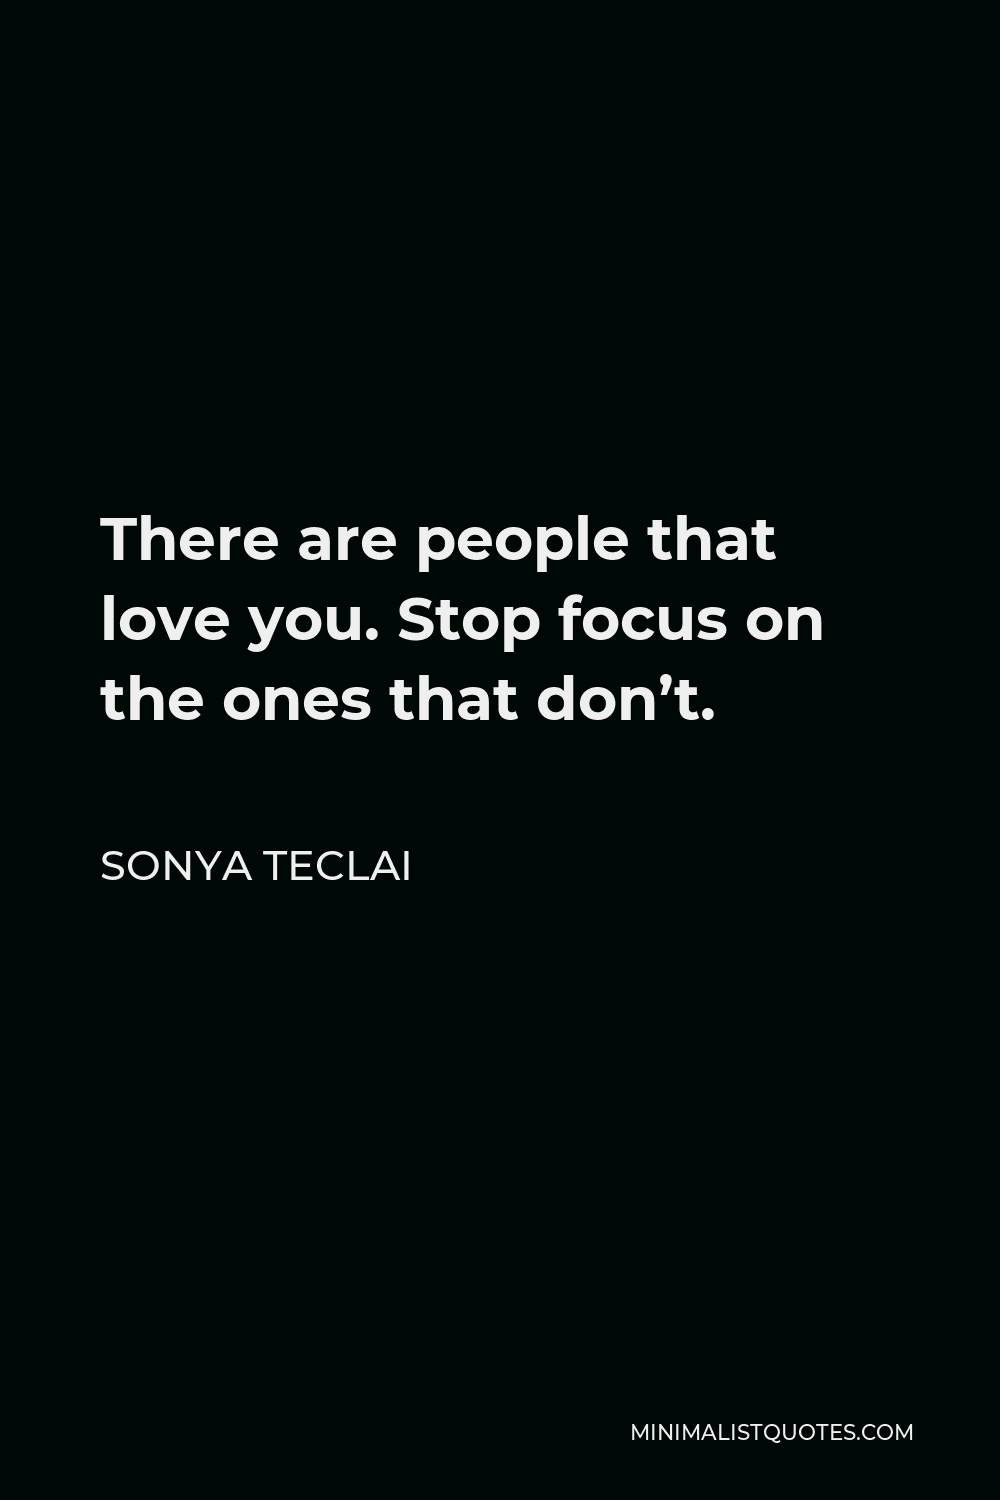 Sonya Teclai Quote - There are people that love you. Stop focus on the ones that don’t.